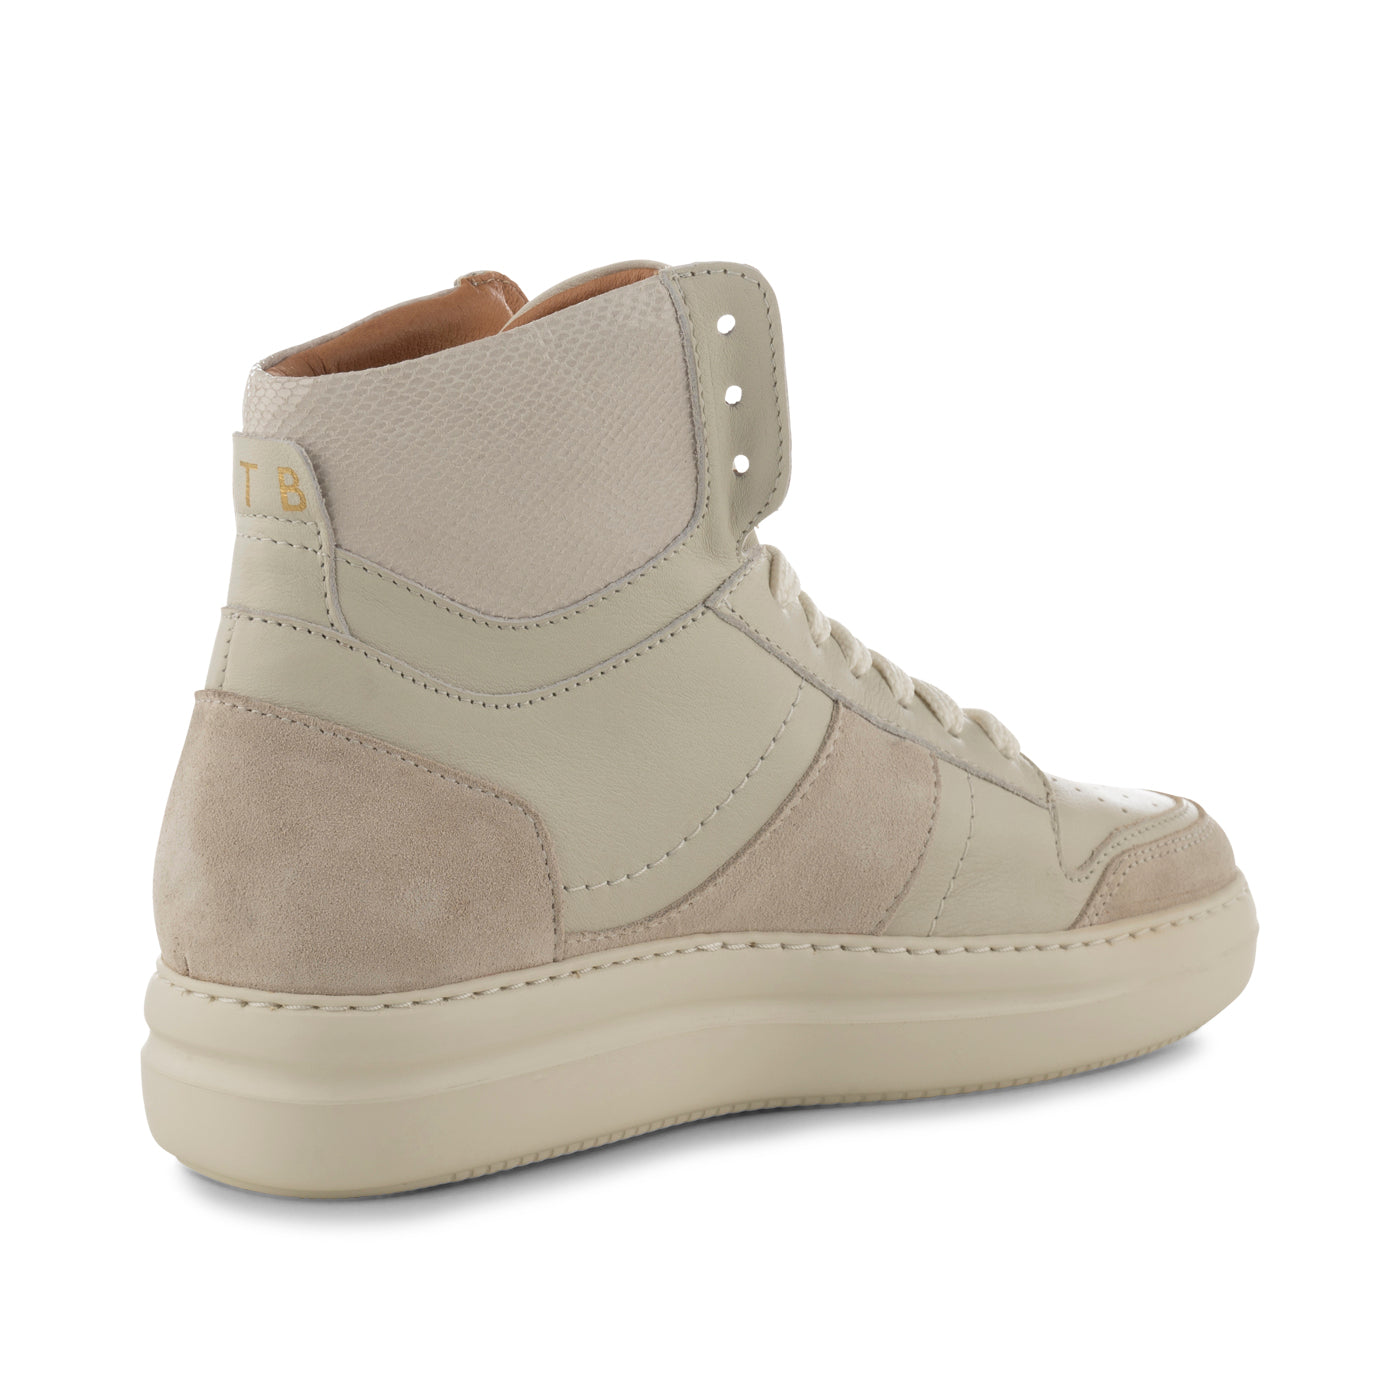 SHOE THE BEAR WOMENS Valda High Top Sneakers 127 OFF WHITE